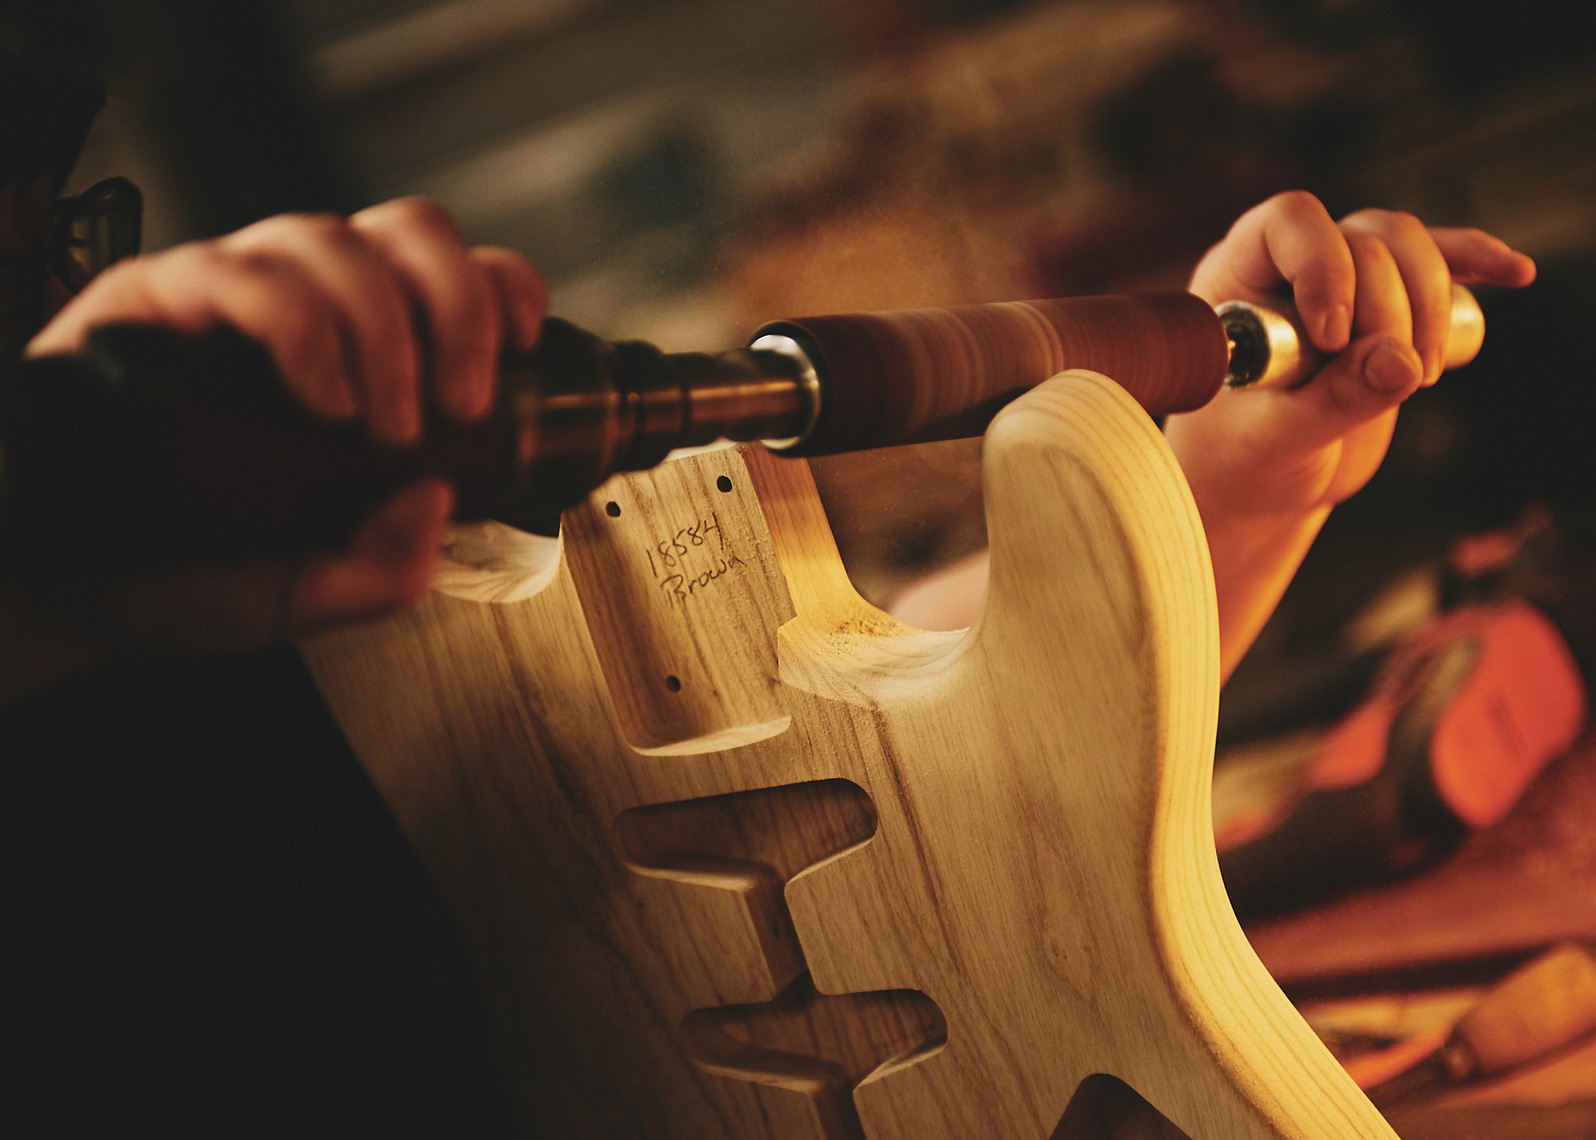 Final touches to body of custom guitar | Brand library photography